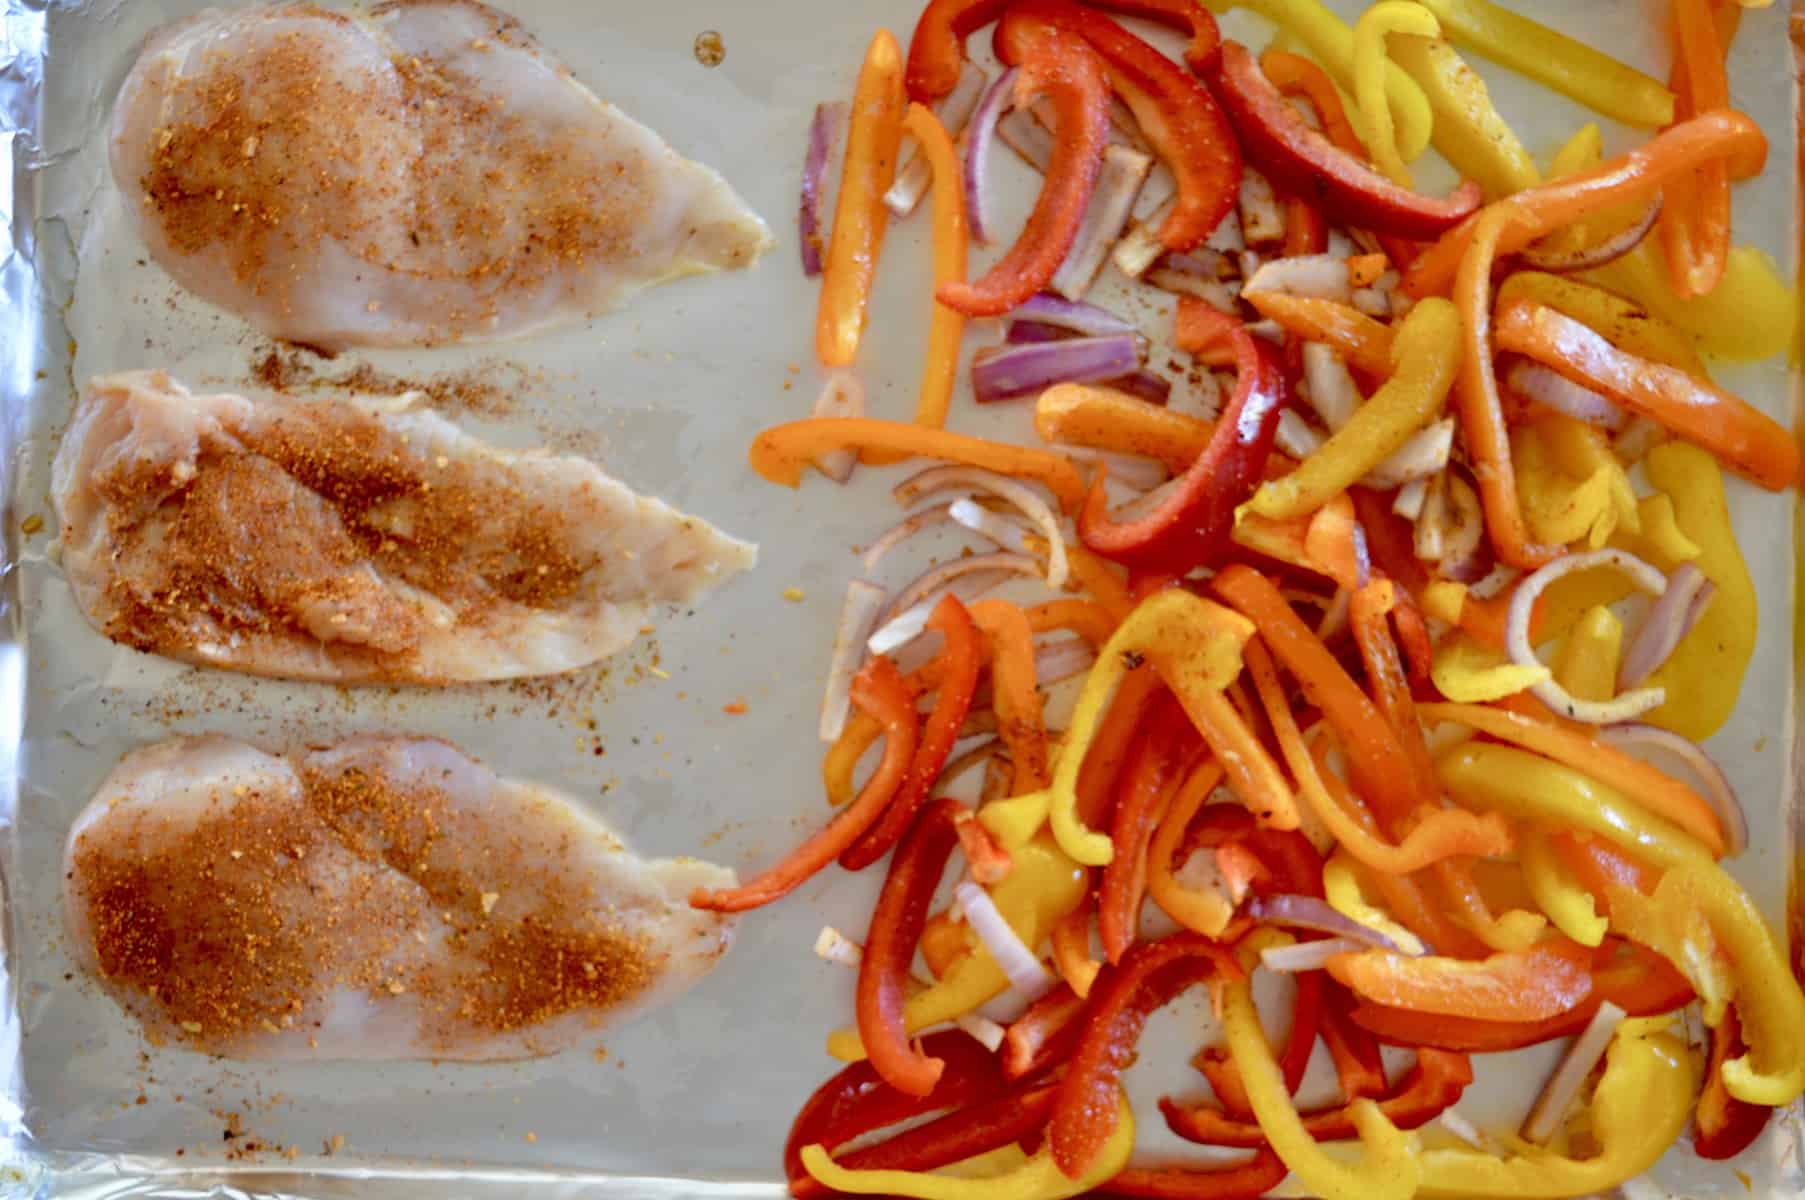 sprinkle taco seasoning on the chicken and bell peppers